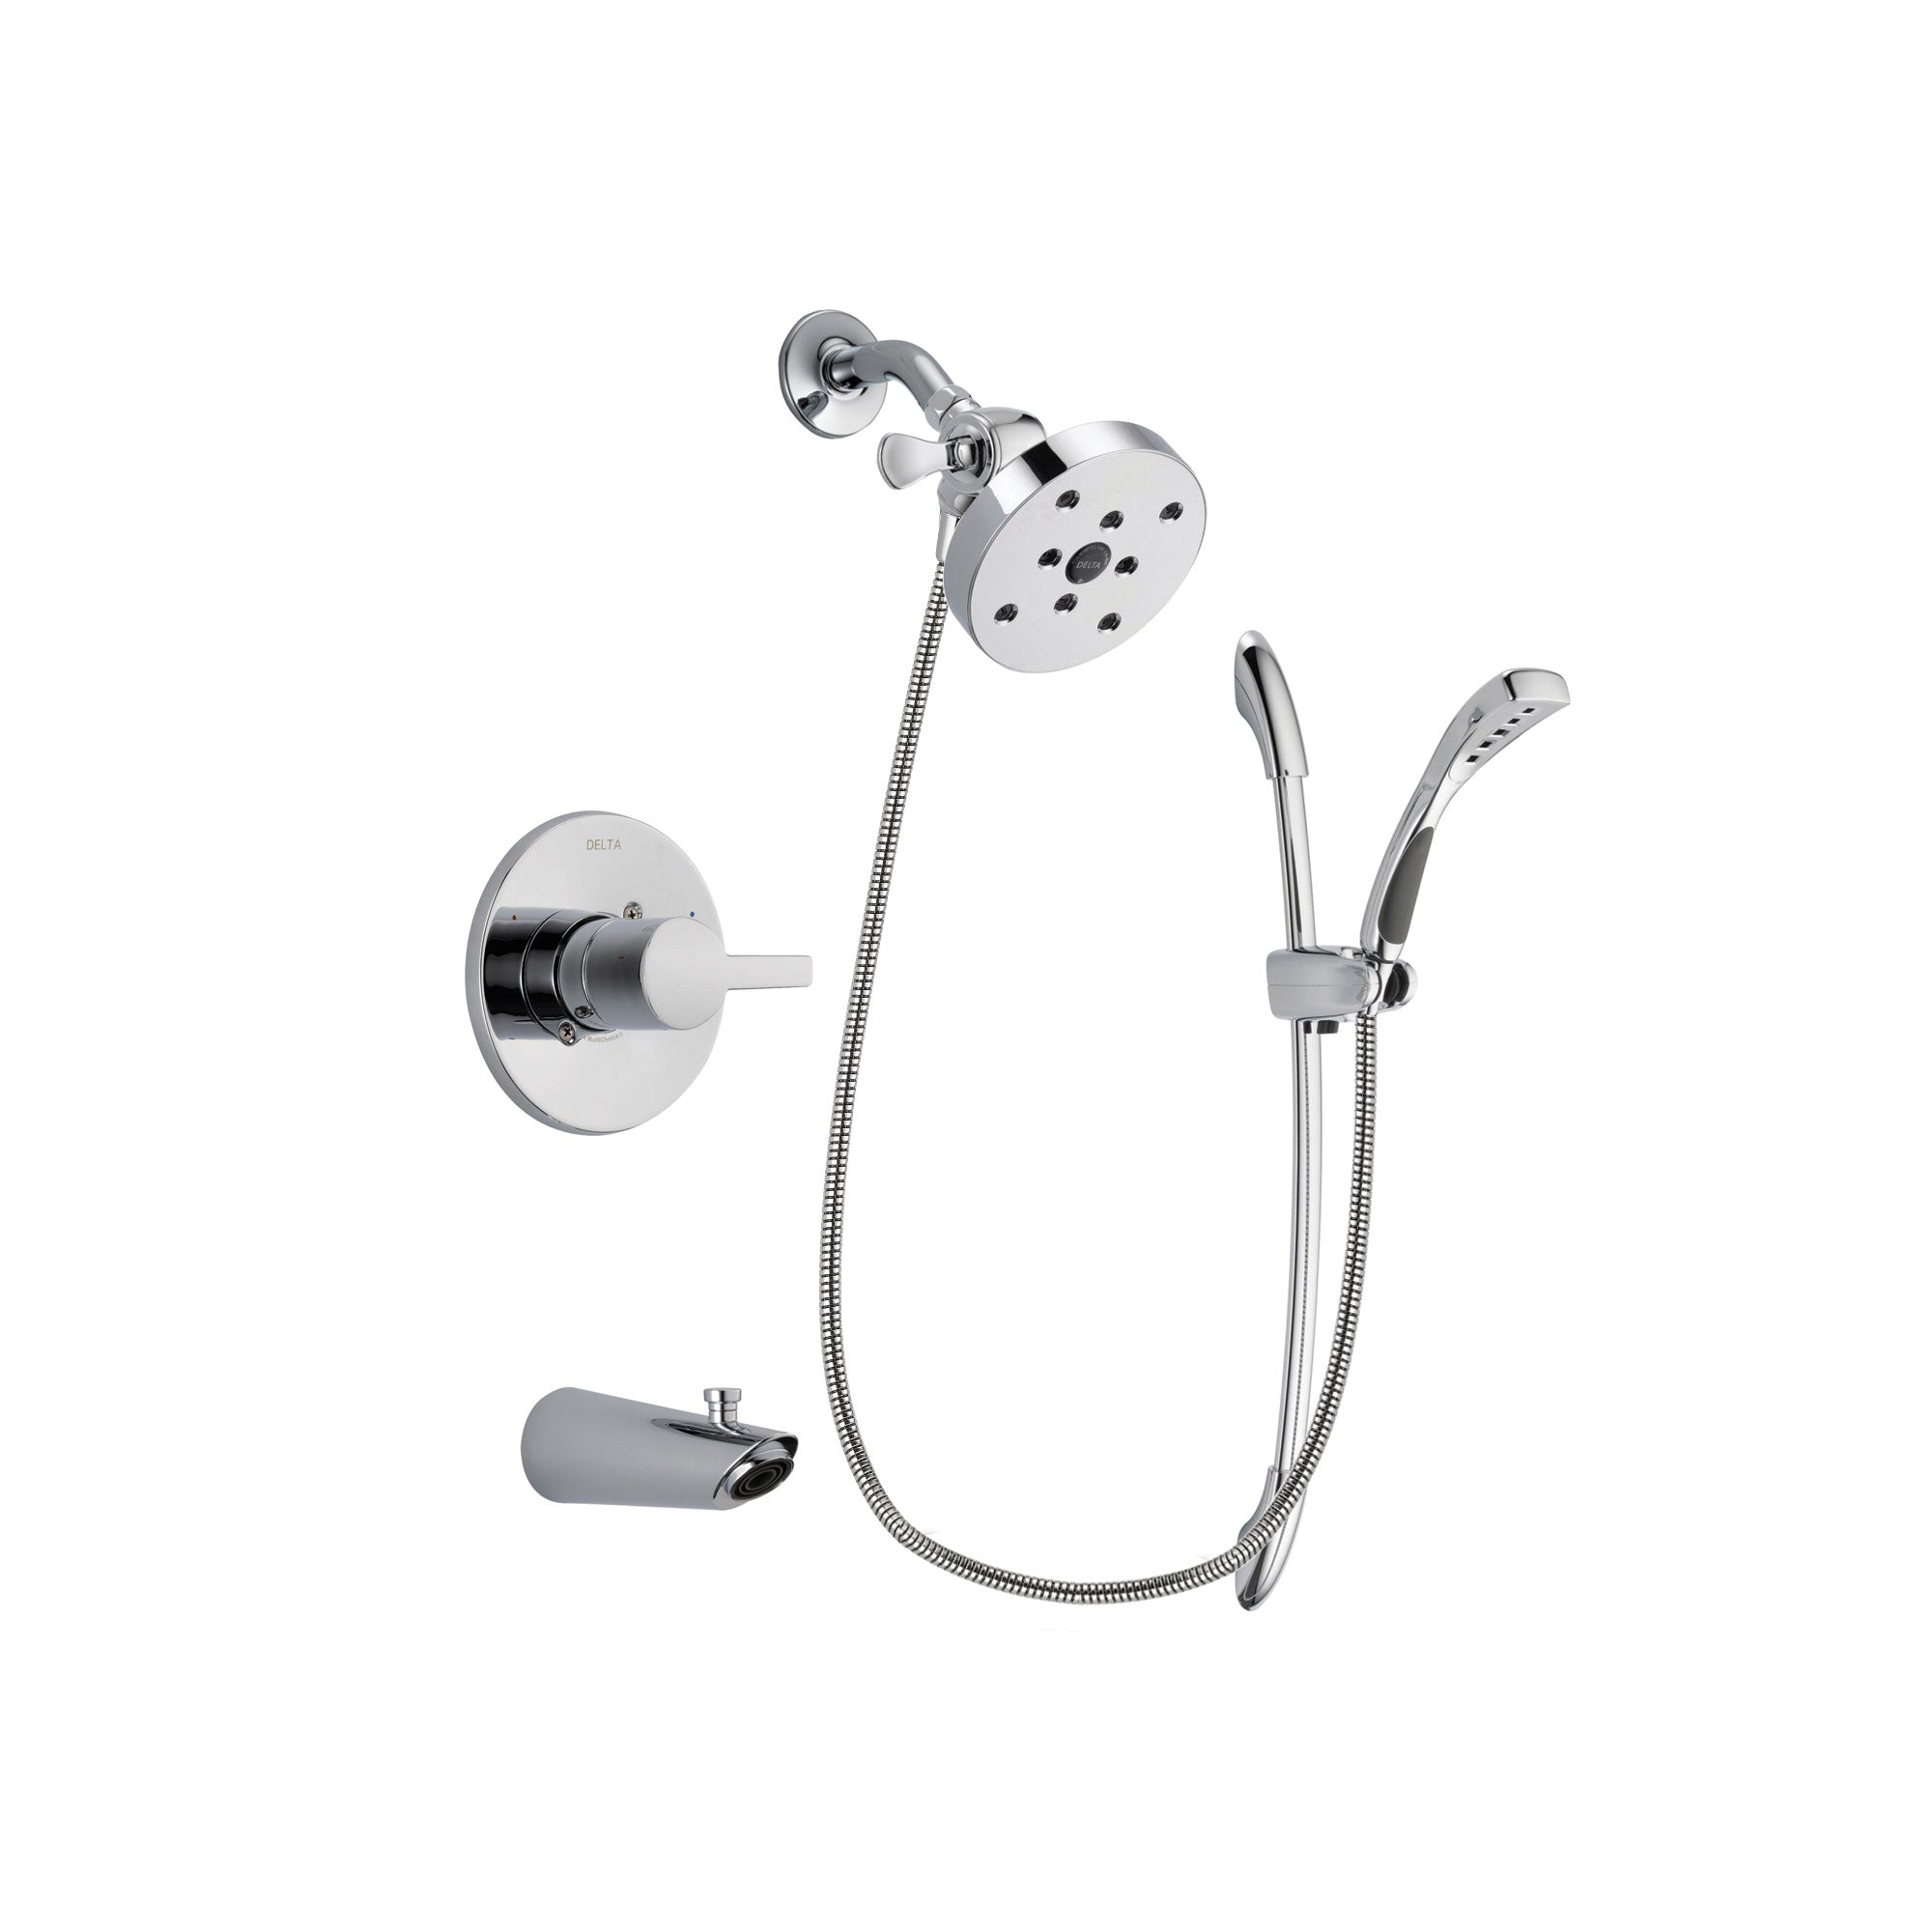 Delta Compel Chrome Finish Tub and Shower Faucet System Package with 5-1/2 inch Shower Head and Handheld Shower with Slide Bar Includes Rough-in Valve and Tub Spout DSP0541V